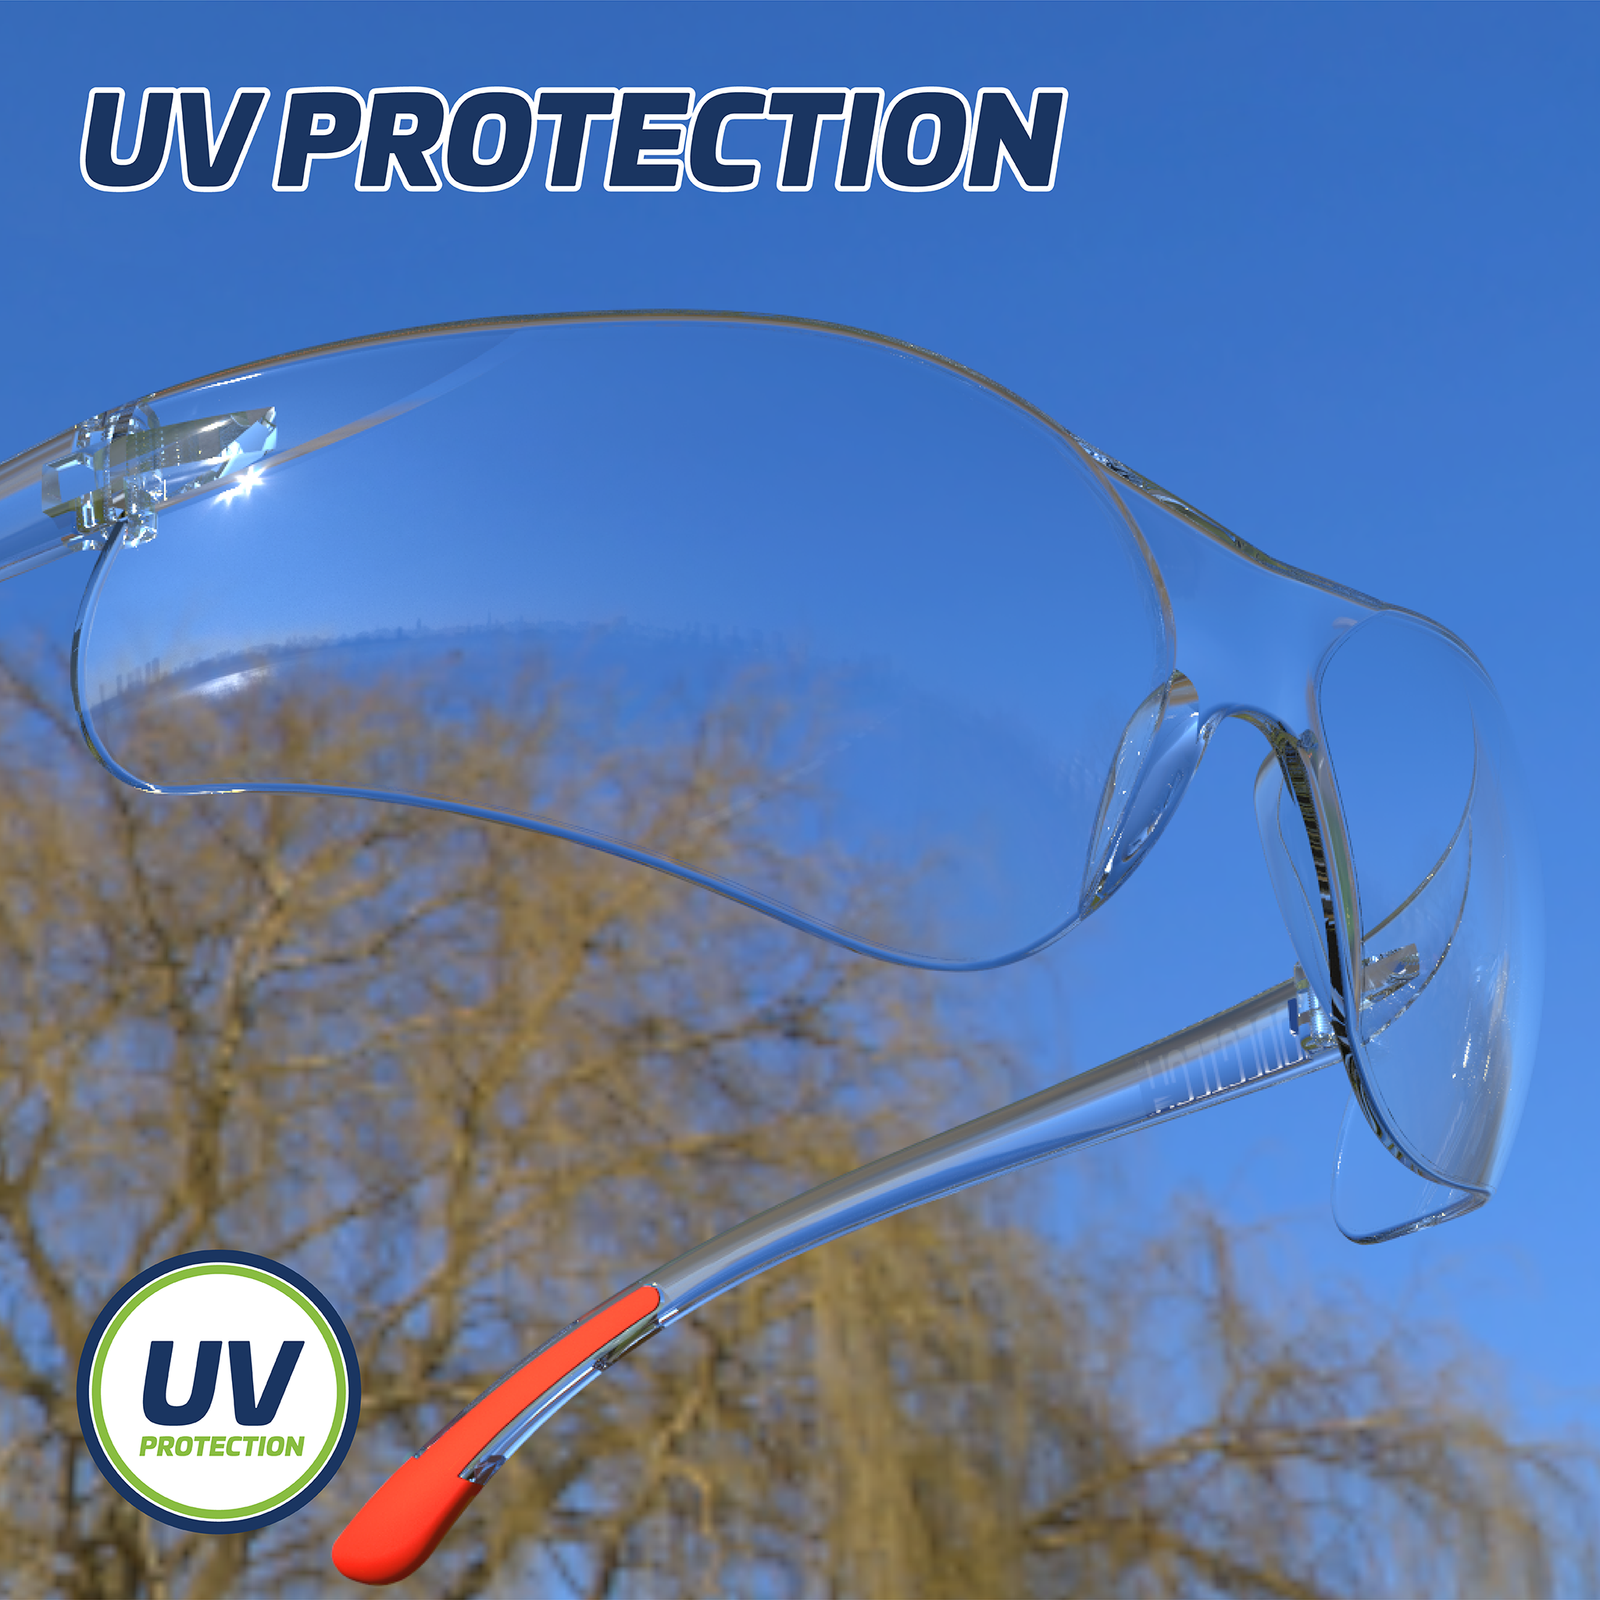 Close up view of the clear High impact Jorestech Safety glasses with a background of the sky and tree branches. Text Reads: UV protection.